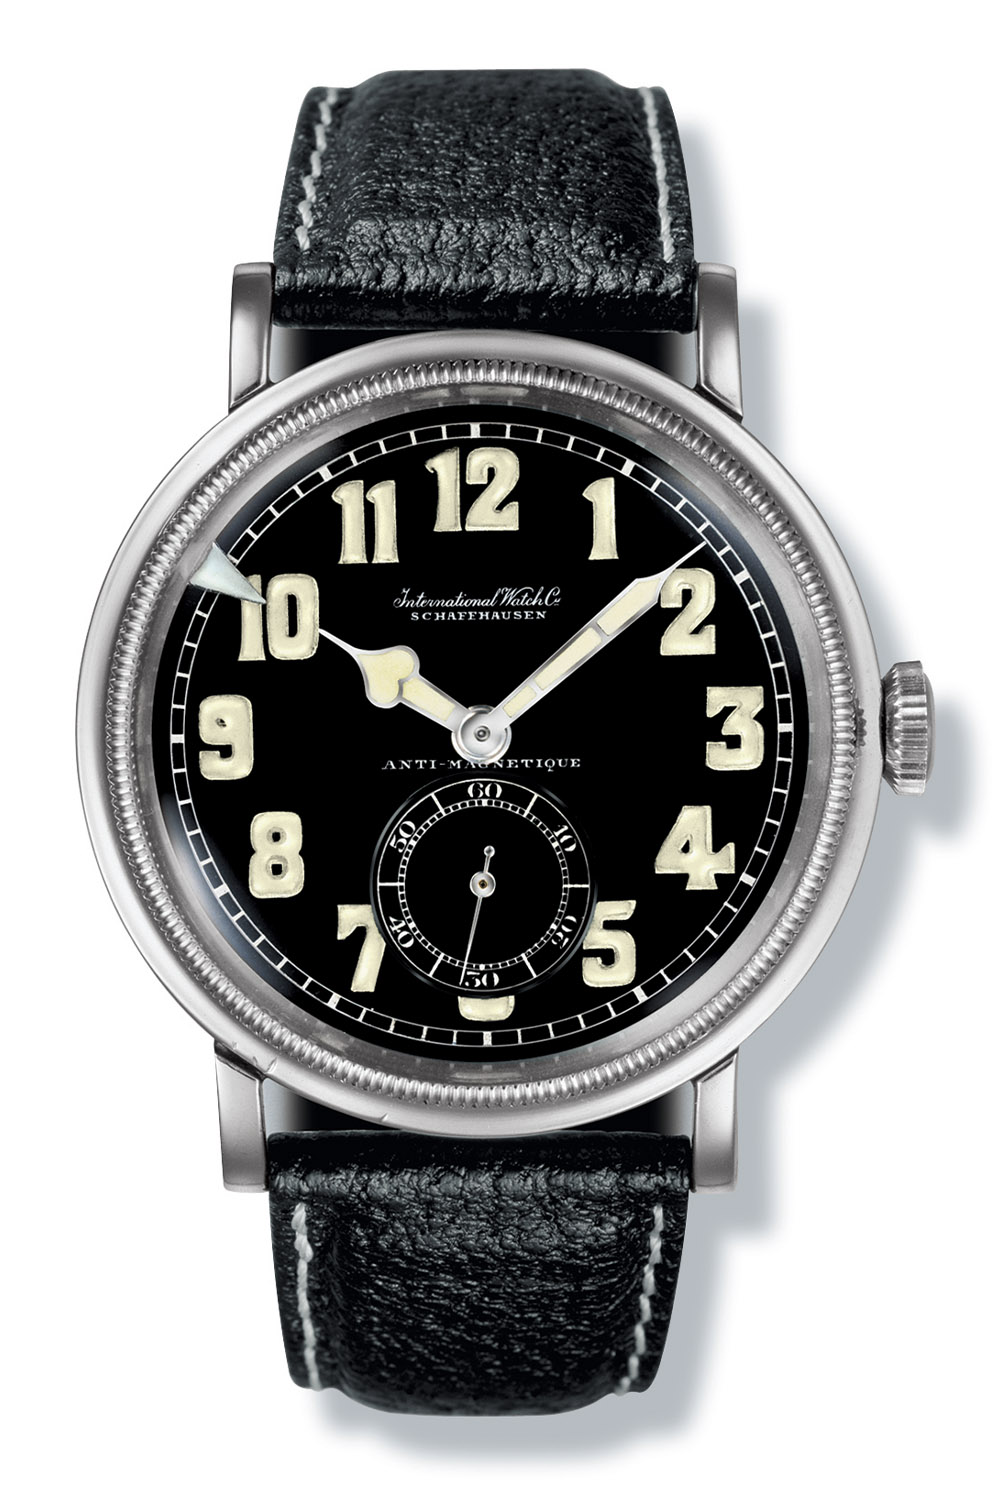 IWC 1936 Special Pilots Watch